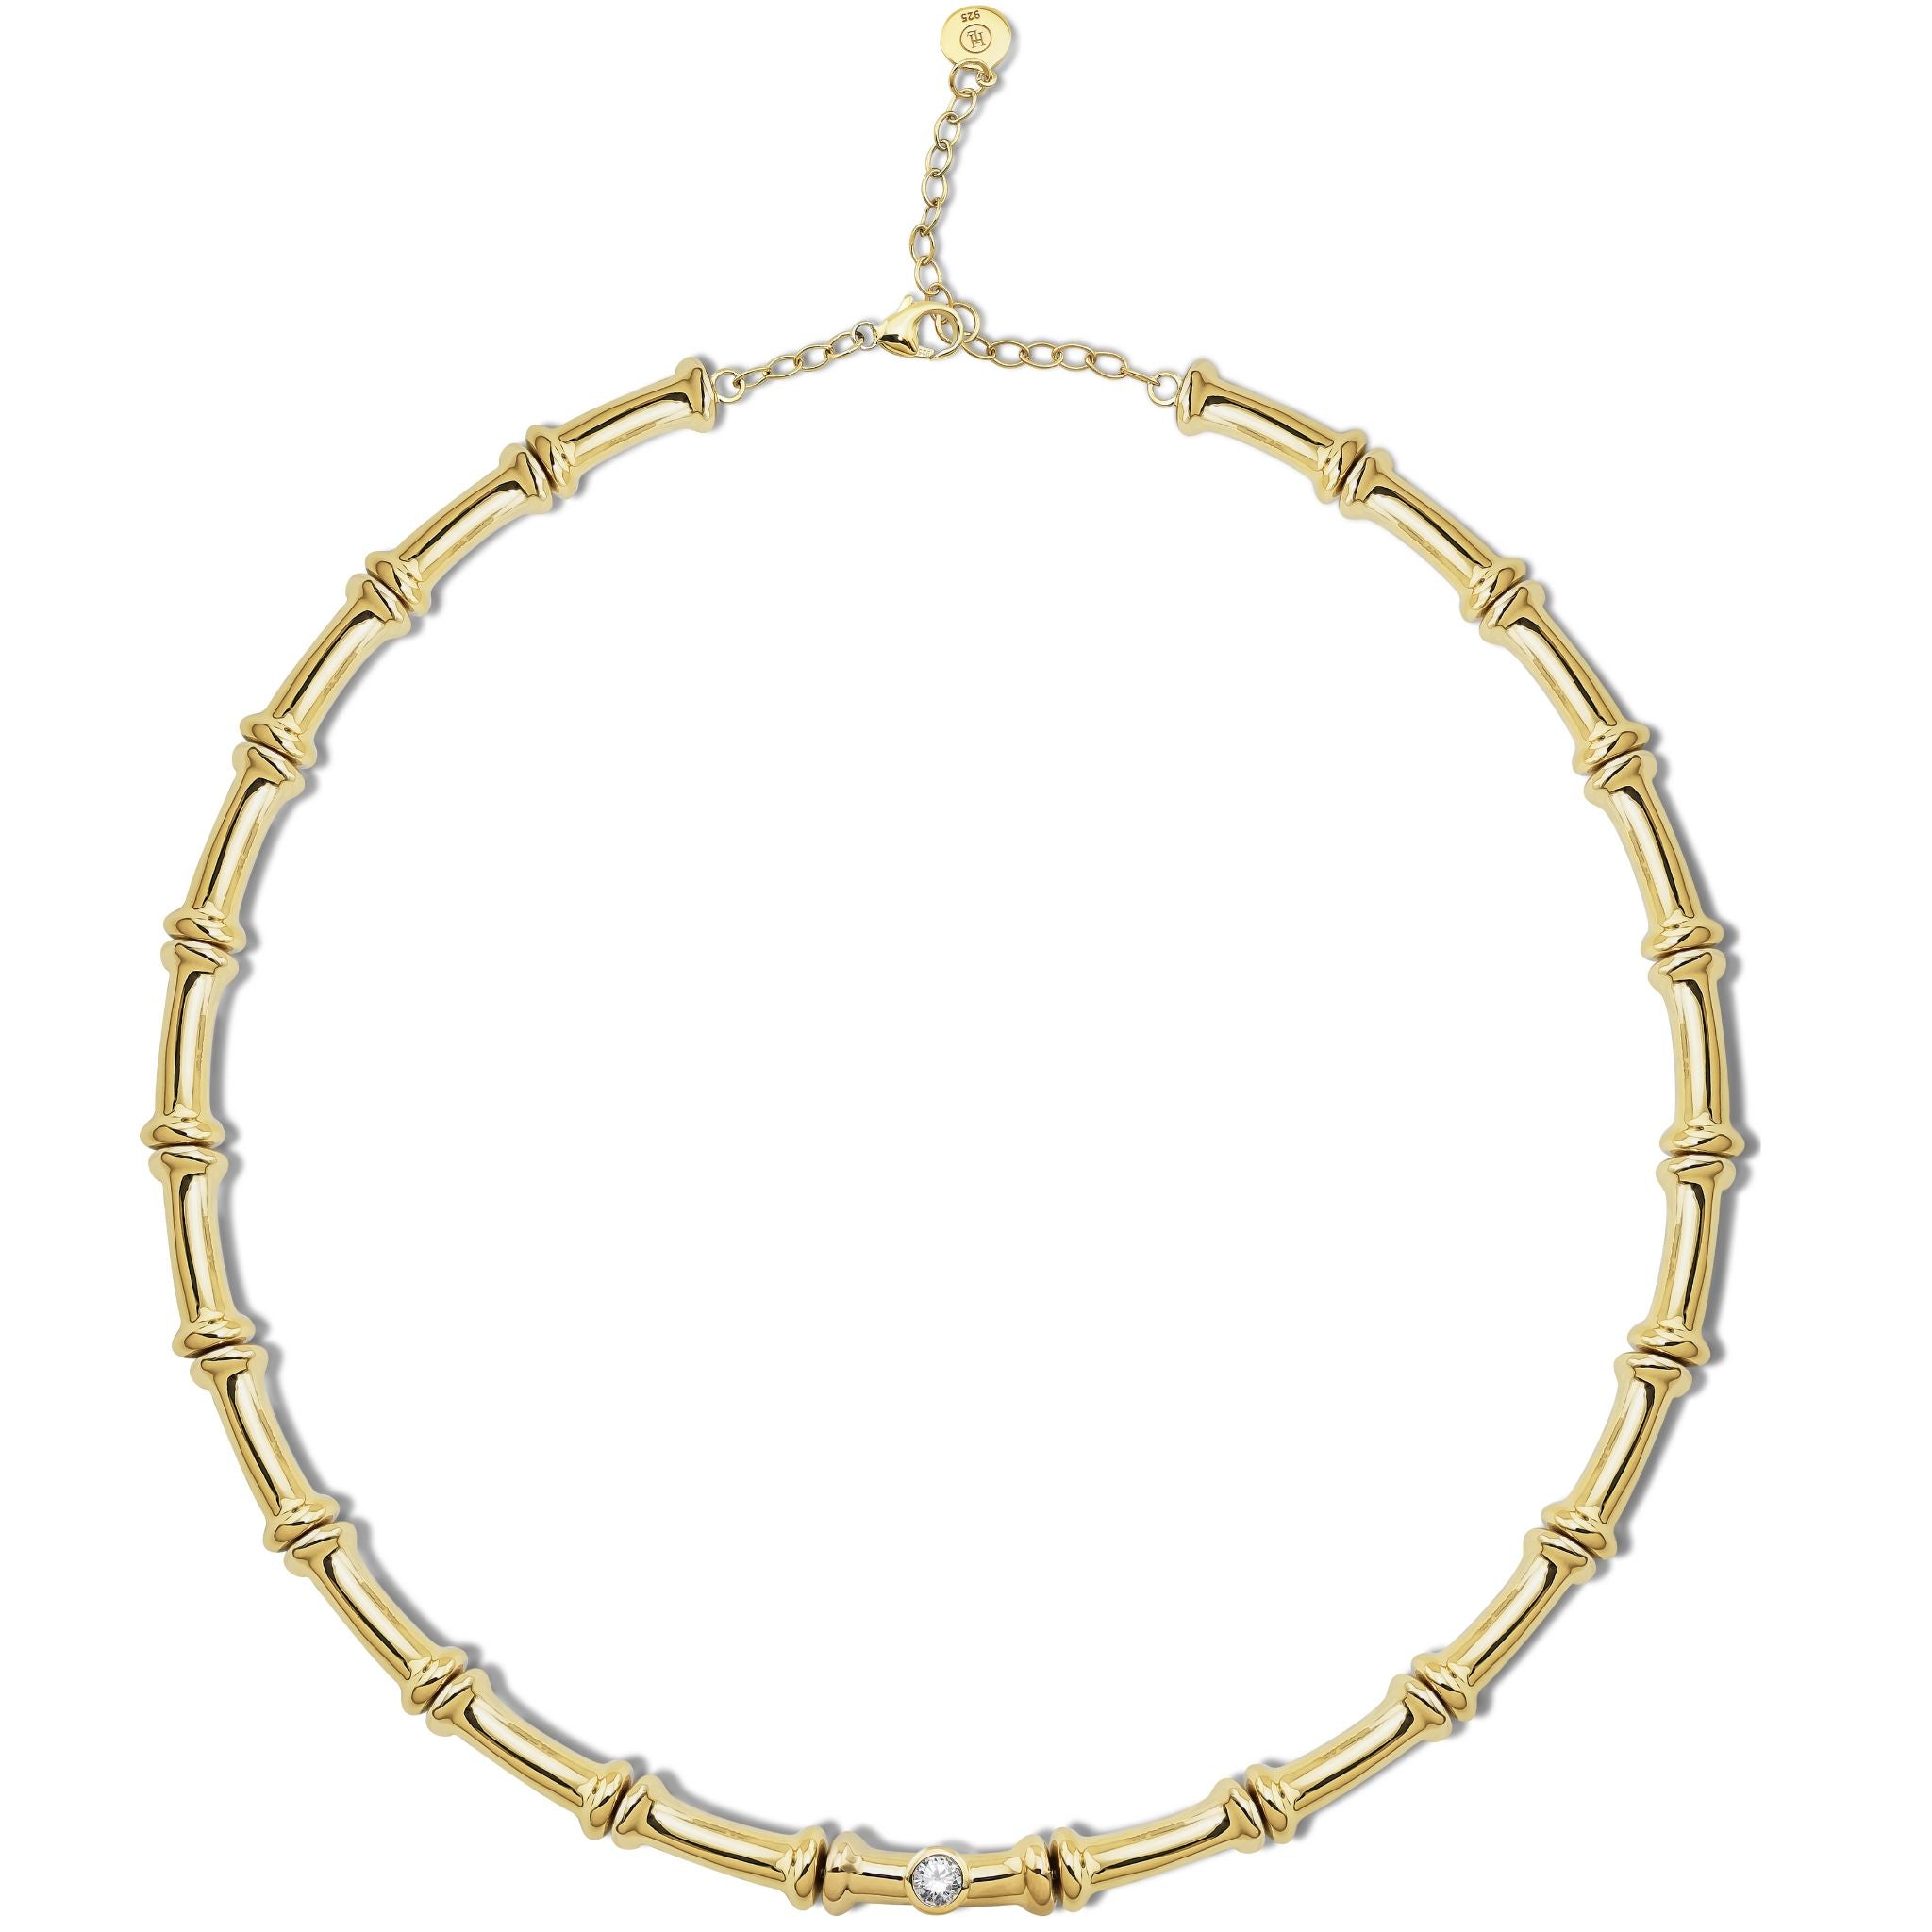 The Bamboo Necklace